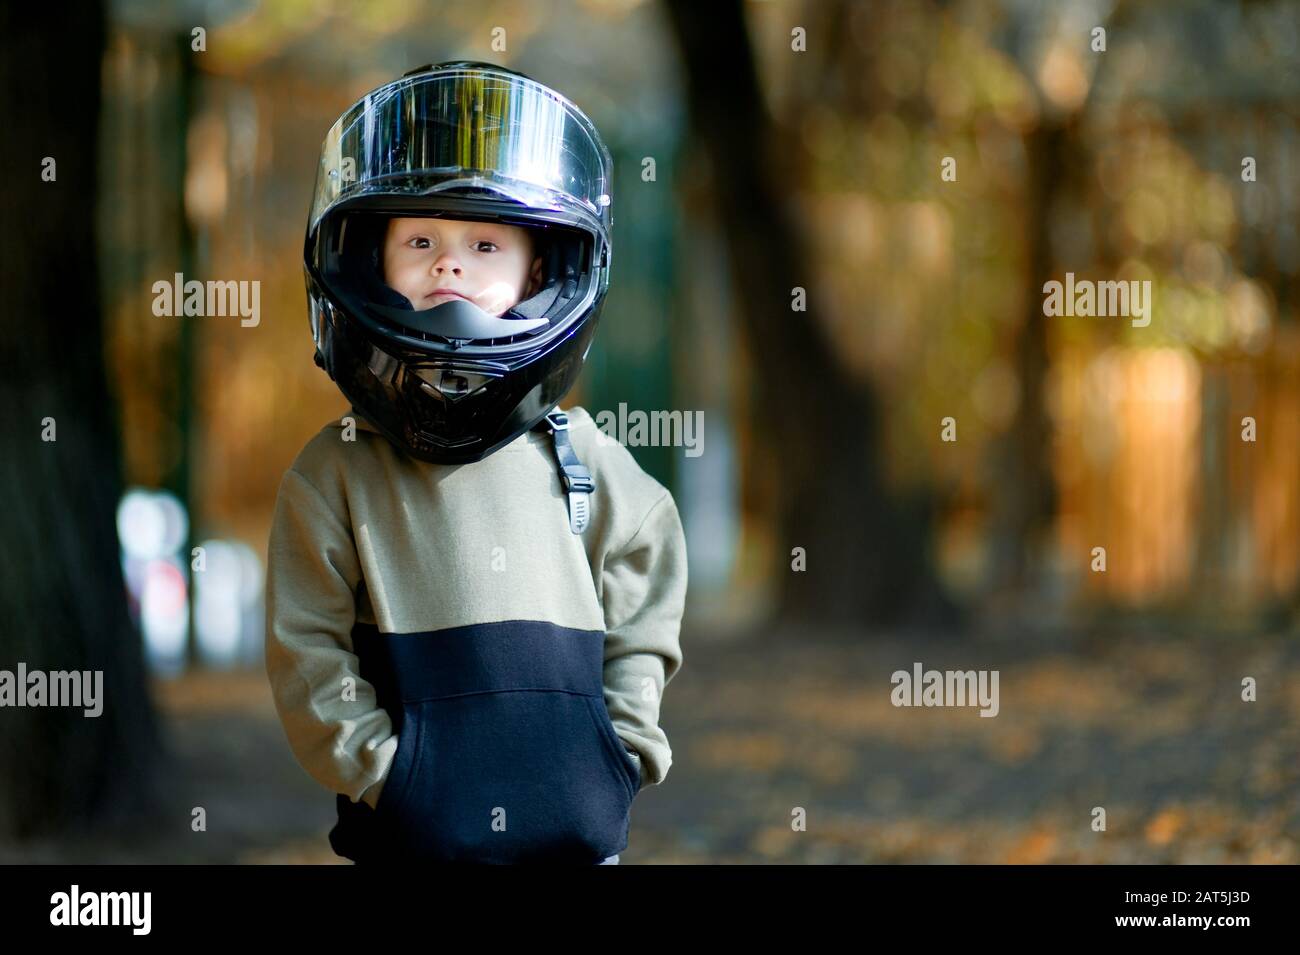 A Child With A Motorcycle Helmet High Resolution Stock Photography And Images Alamy